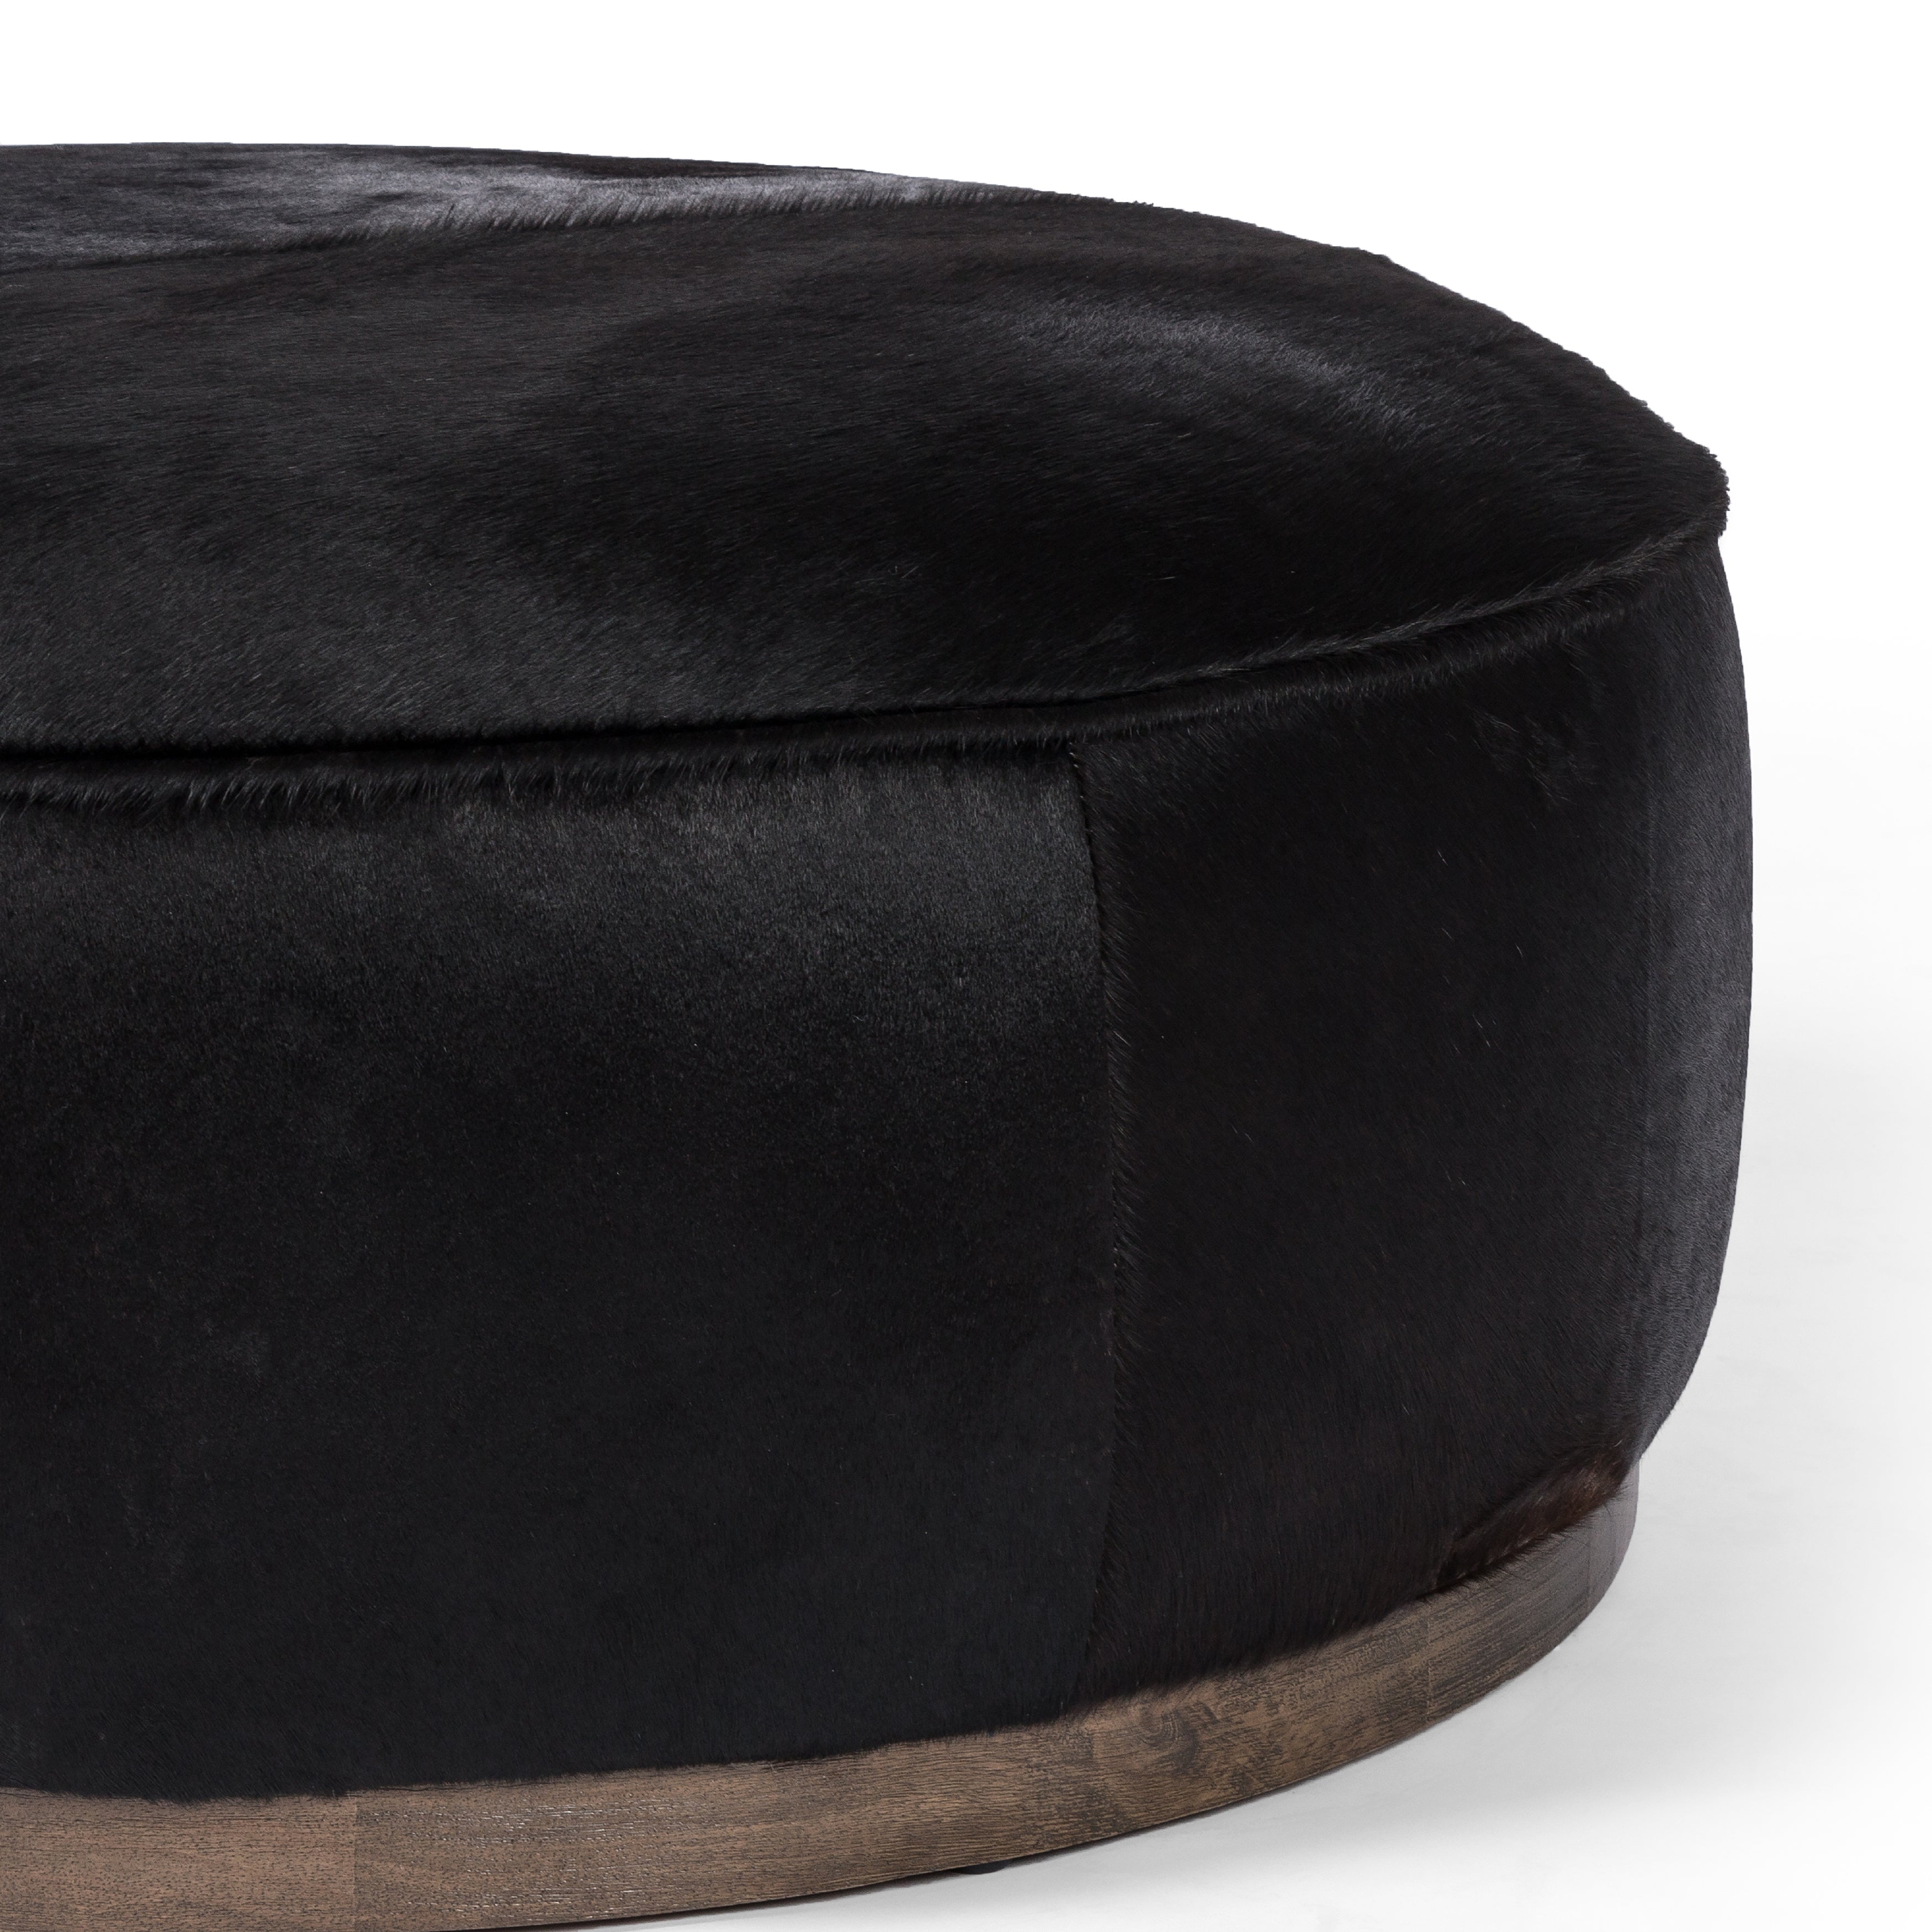 This large, round ottoman of textural hair-on hide brings with it a hip retro vibe as a coffee table or extra seating.  Covered in soft and luminous black hair-on hide, which is naturally warm and textural with authentic highlights. Amethyst Home provides interior design, new construction, custom furniture, and area rugs in the Charlotte metro area.